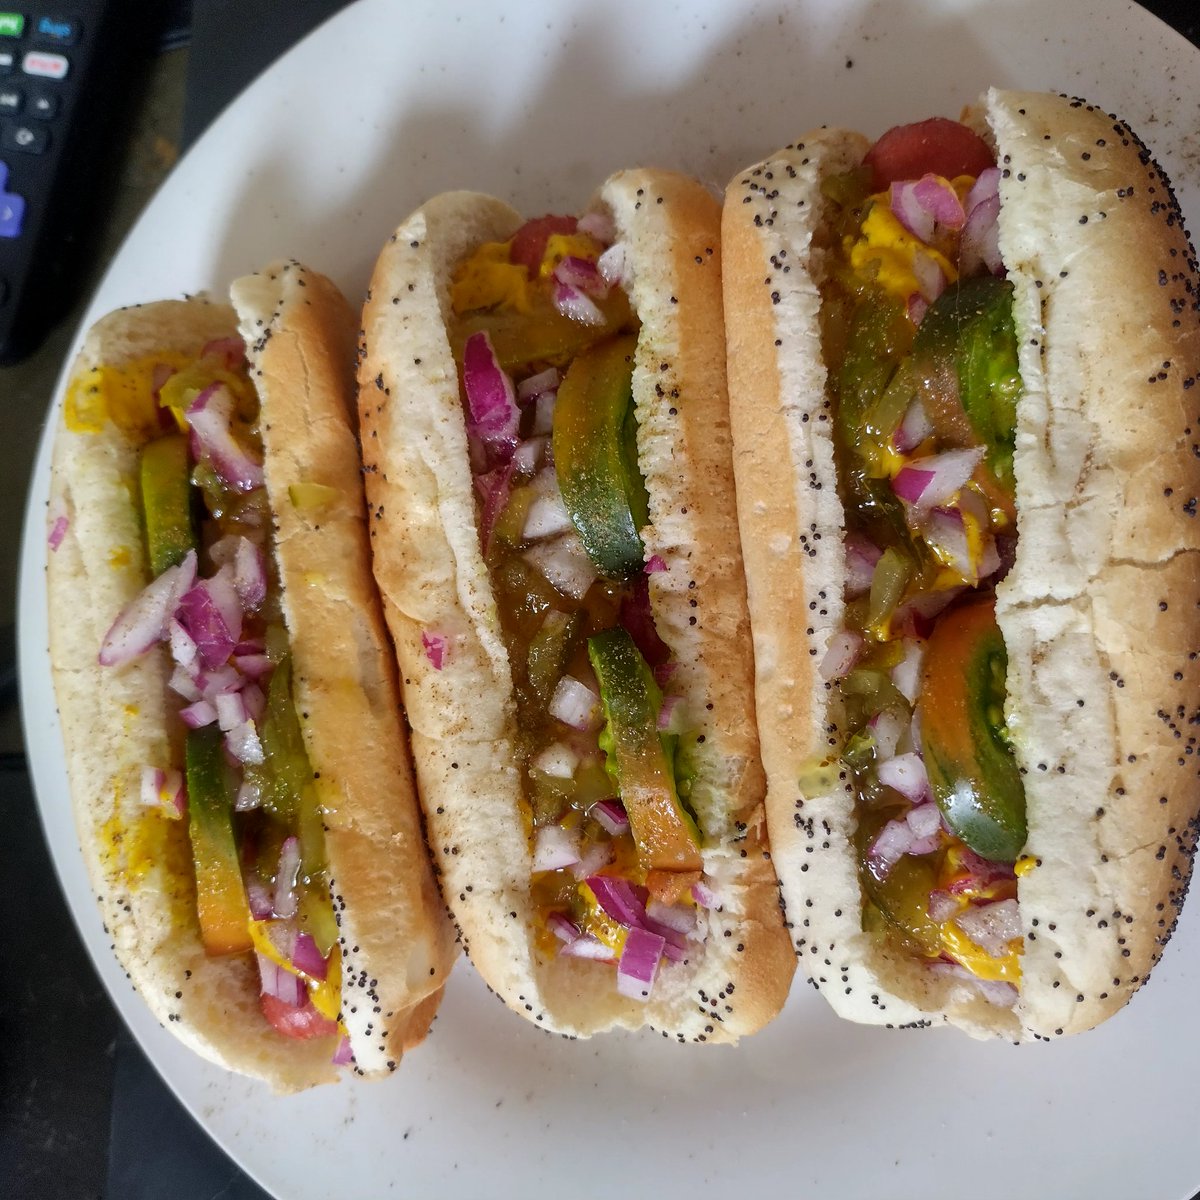 Chicago style hot dog with Vienna beef hot dogs, S Rosens  poppy seed bun! Red onions & heirloom tomato from my garden bc that's what I had and I'm outta sport peppers so I'll use Sriracha  #chicagohotdog #viennabeef #srosens